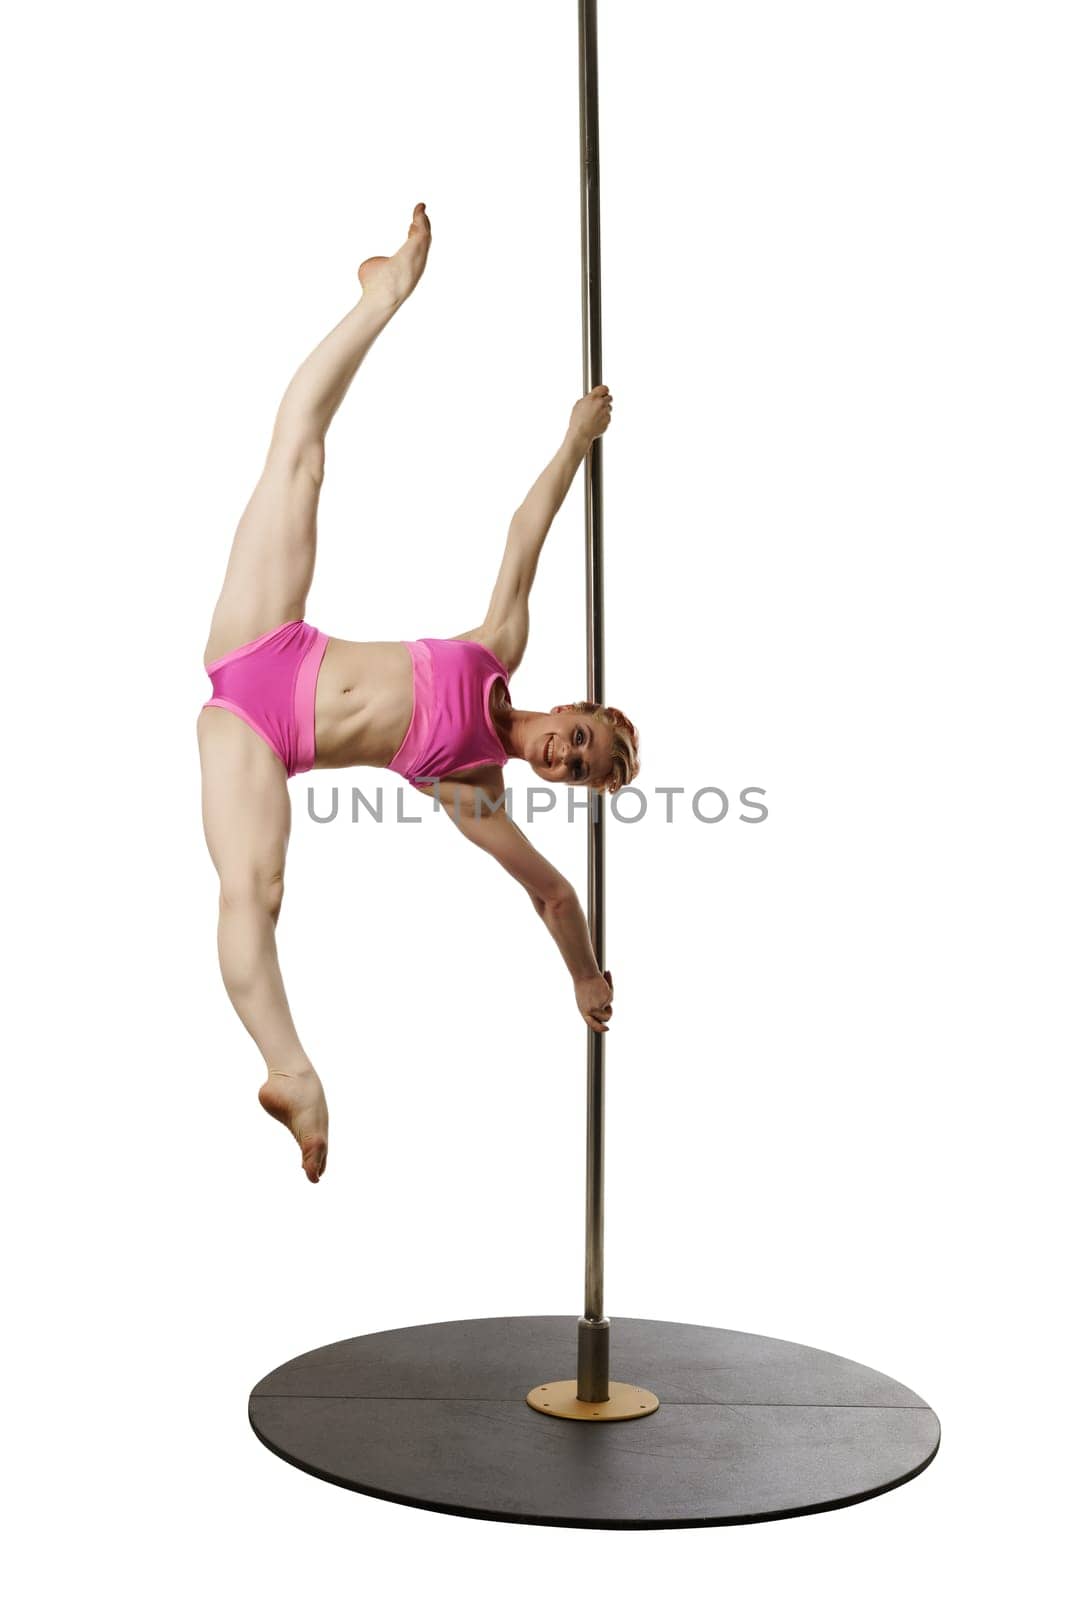 Smiling female gymnast poses during workout on pole